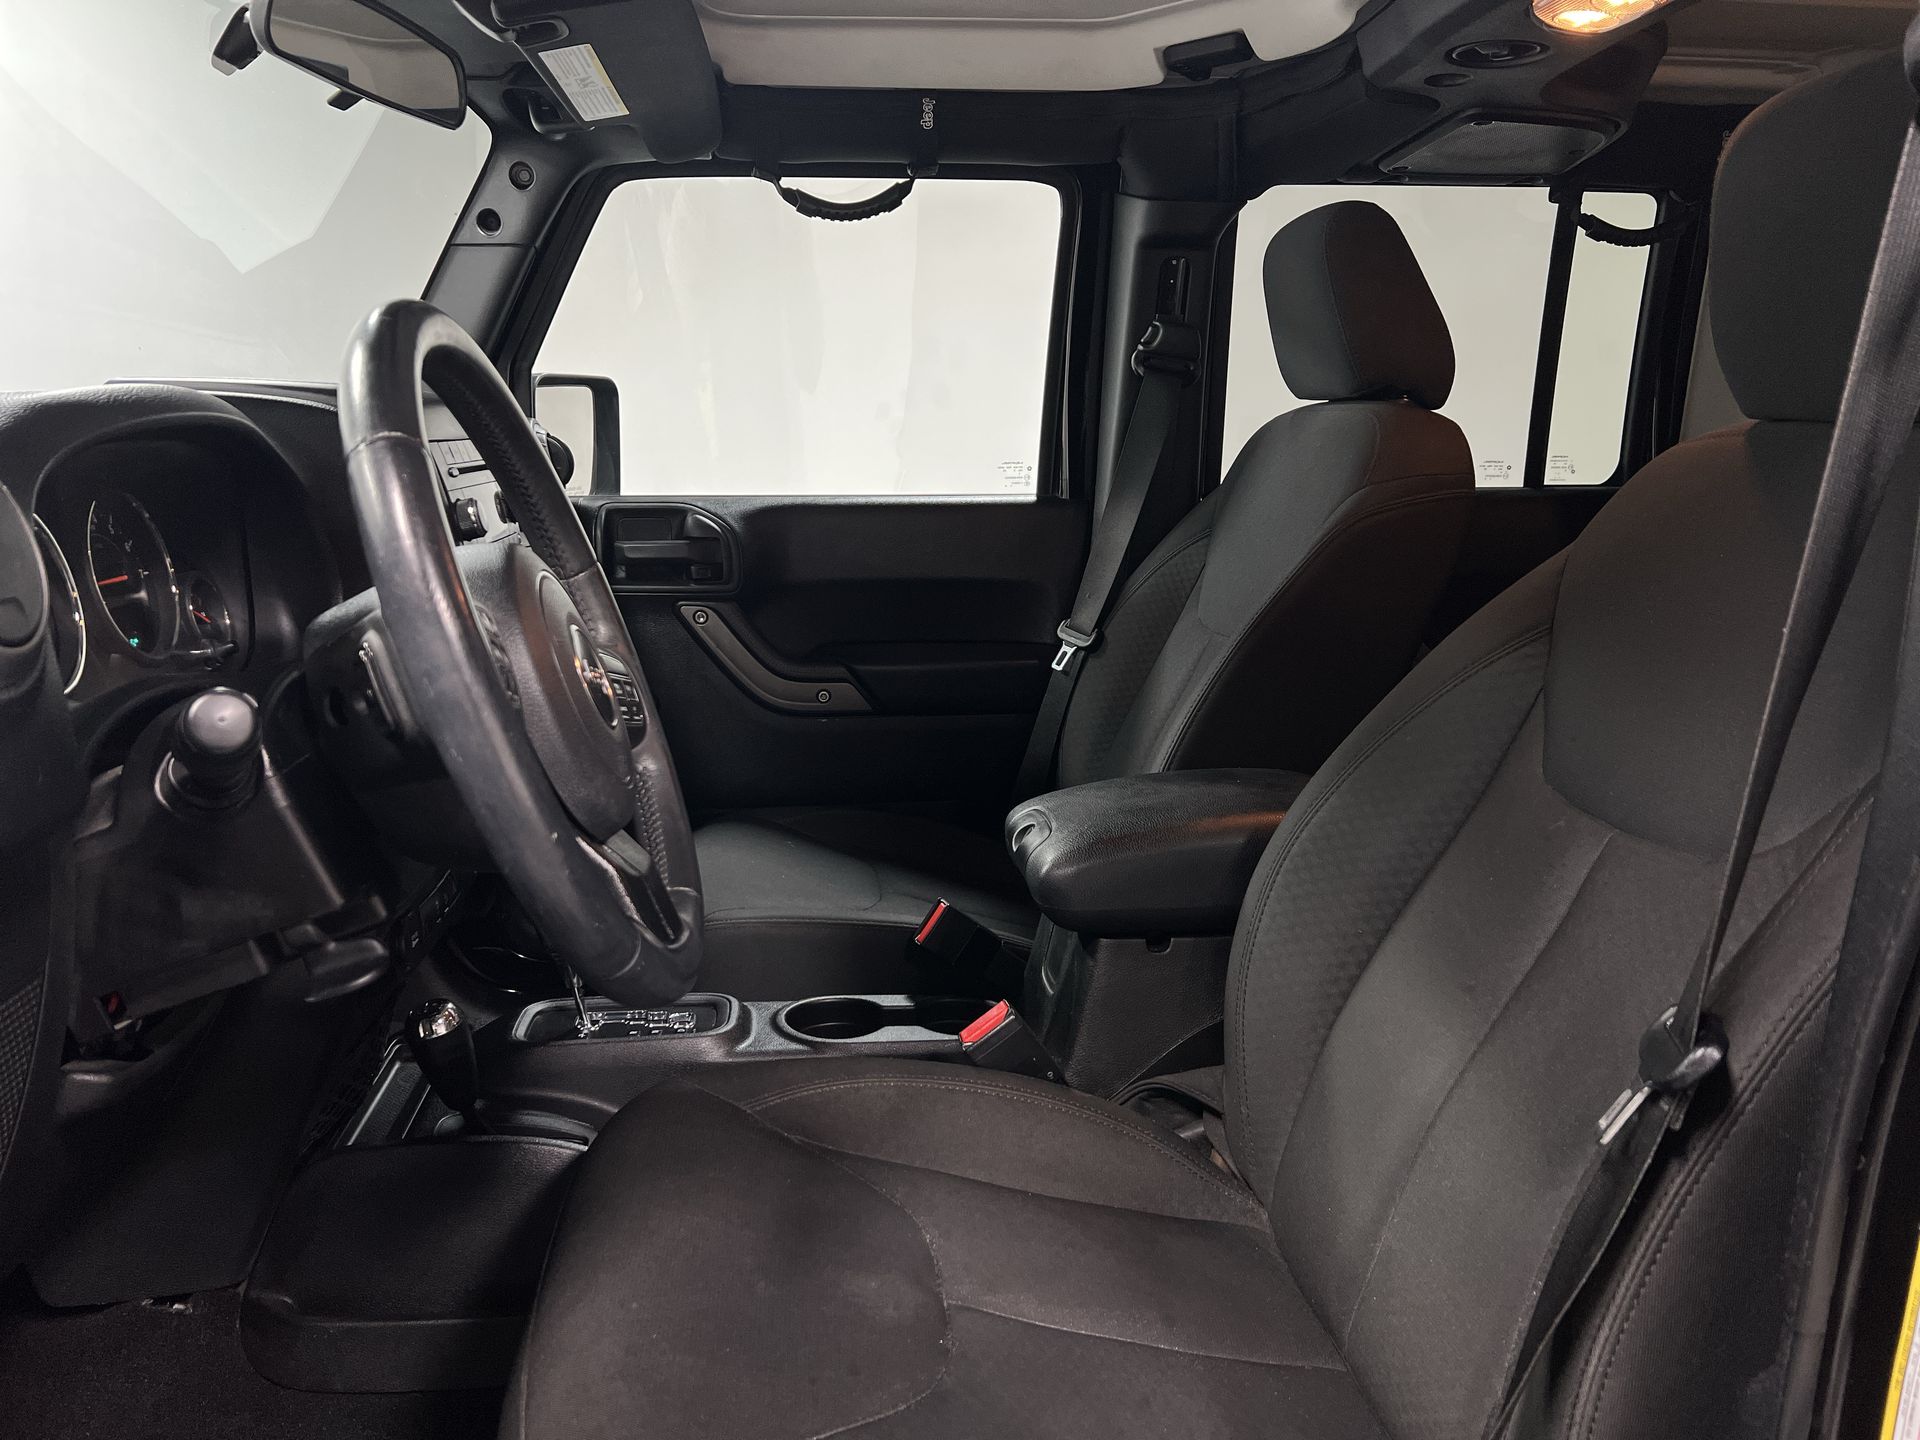 Used 2016 Jeep Wrangler Unlimited For Sale ($28,499) | Vroom